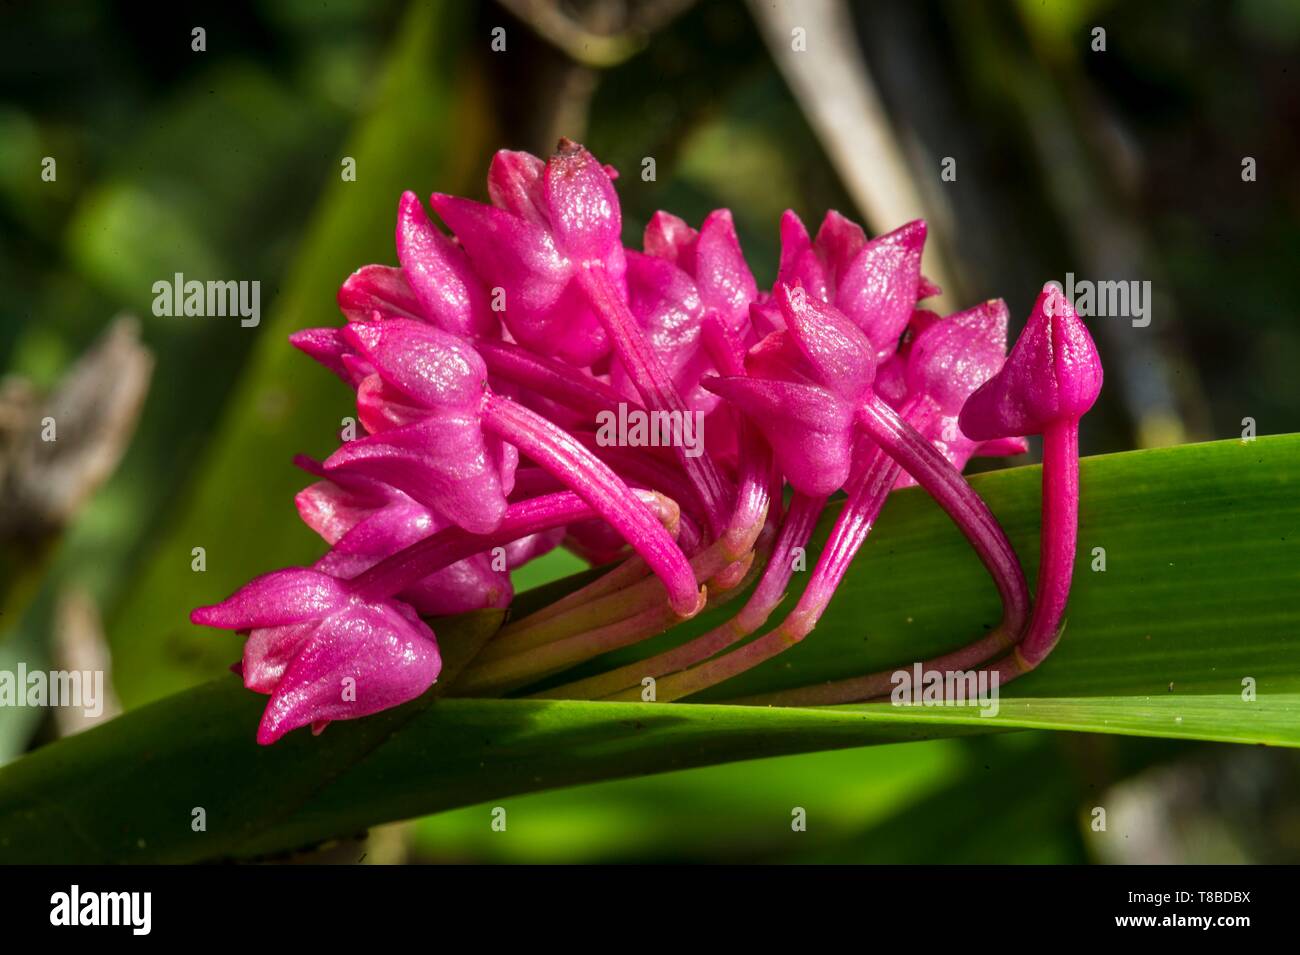 Papua New Guinea, Western Highlands Province, Wahgi Valley, Mount Hagen Region, orchid Stock Photo